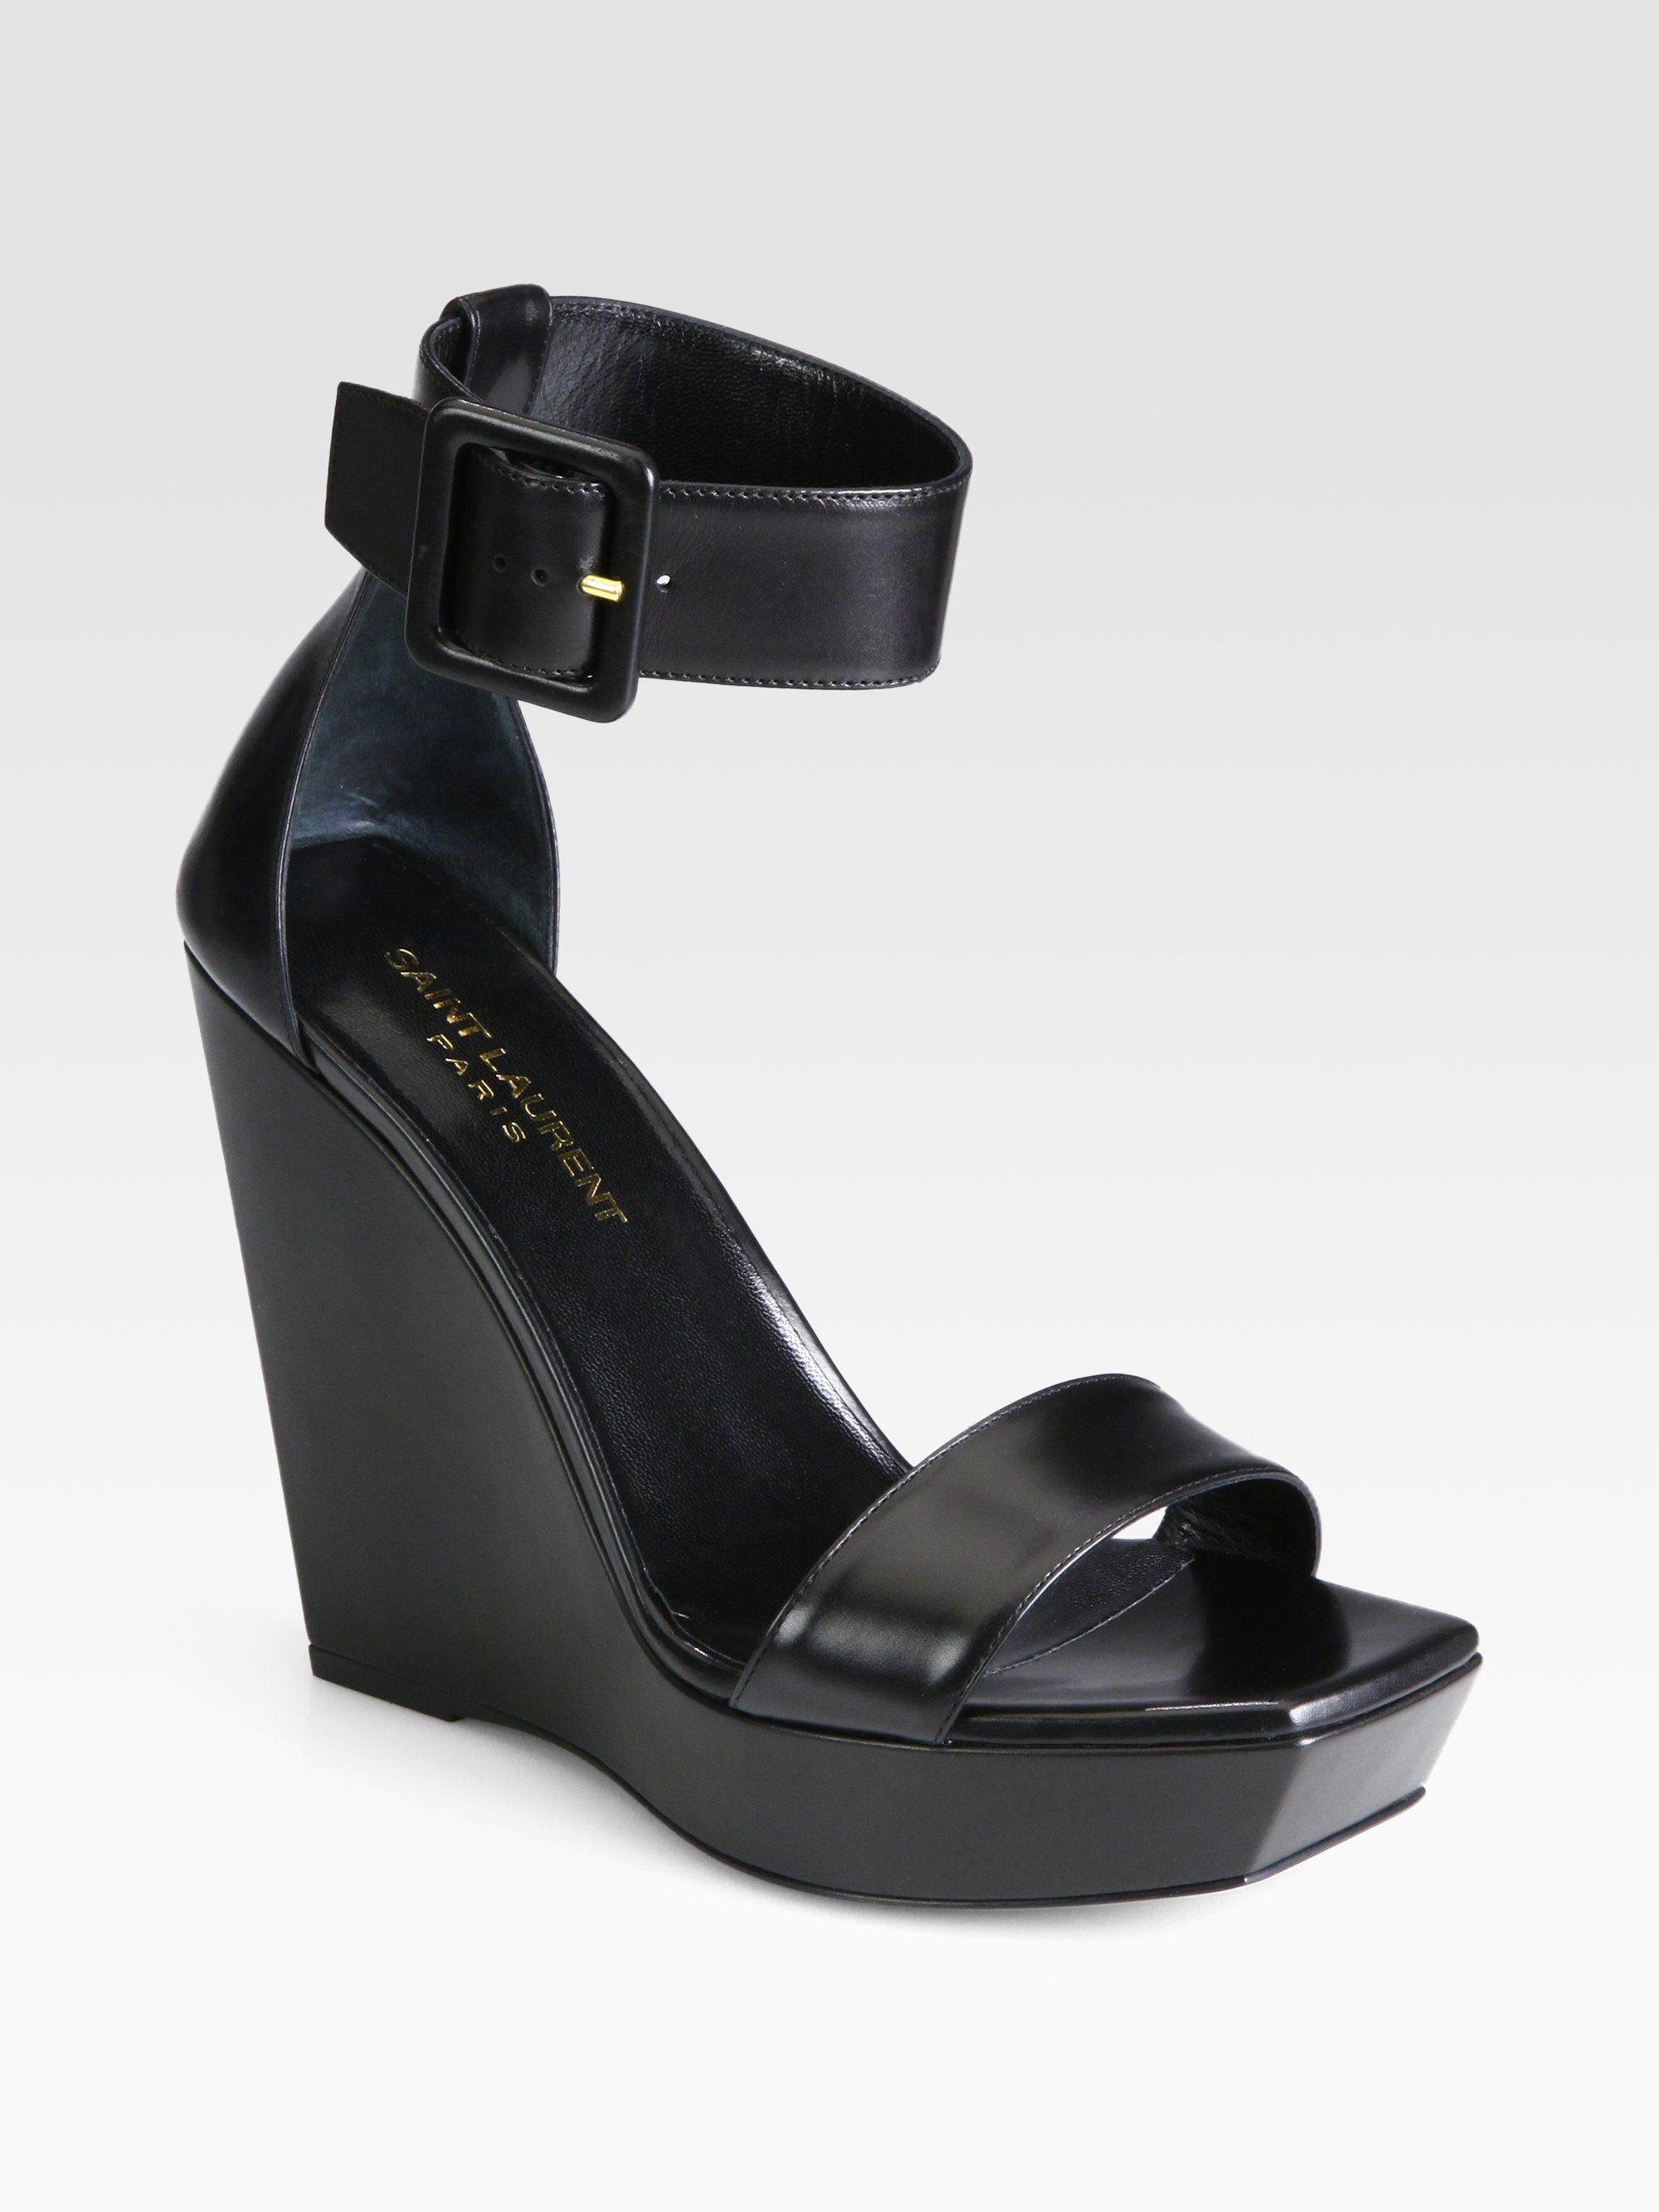 Lyst - Saint Laurent Leather Ankle Strap Wedge Sandals in Black